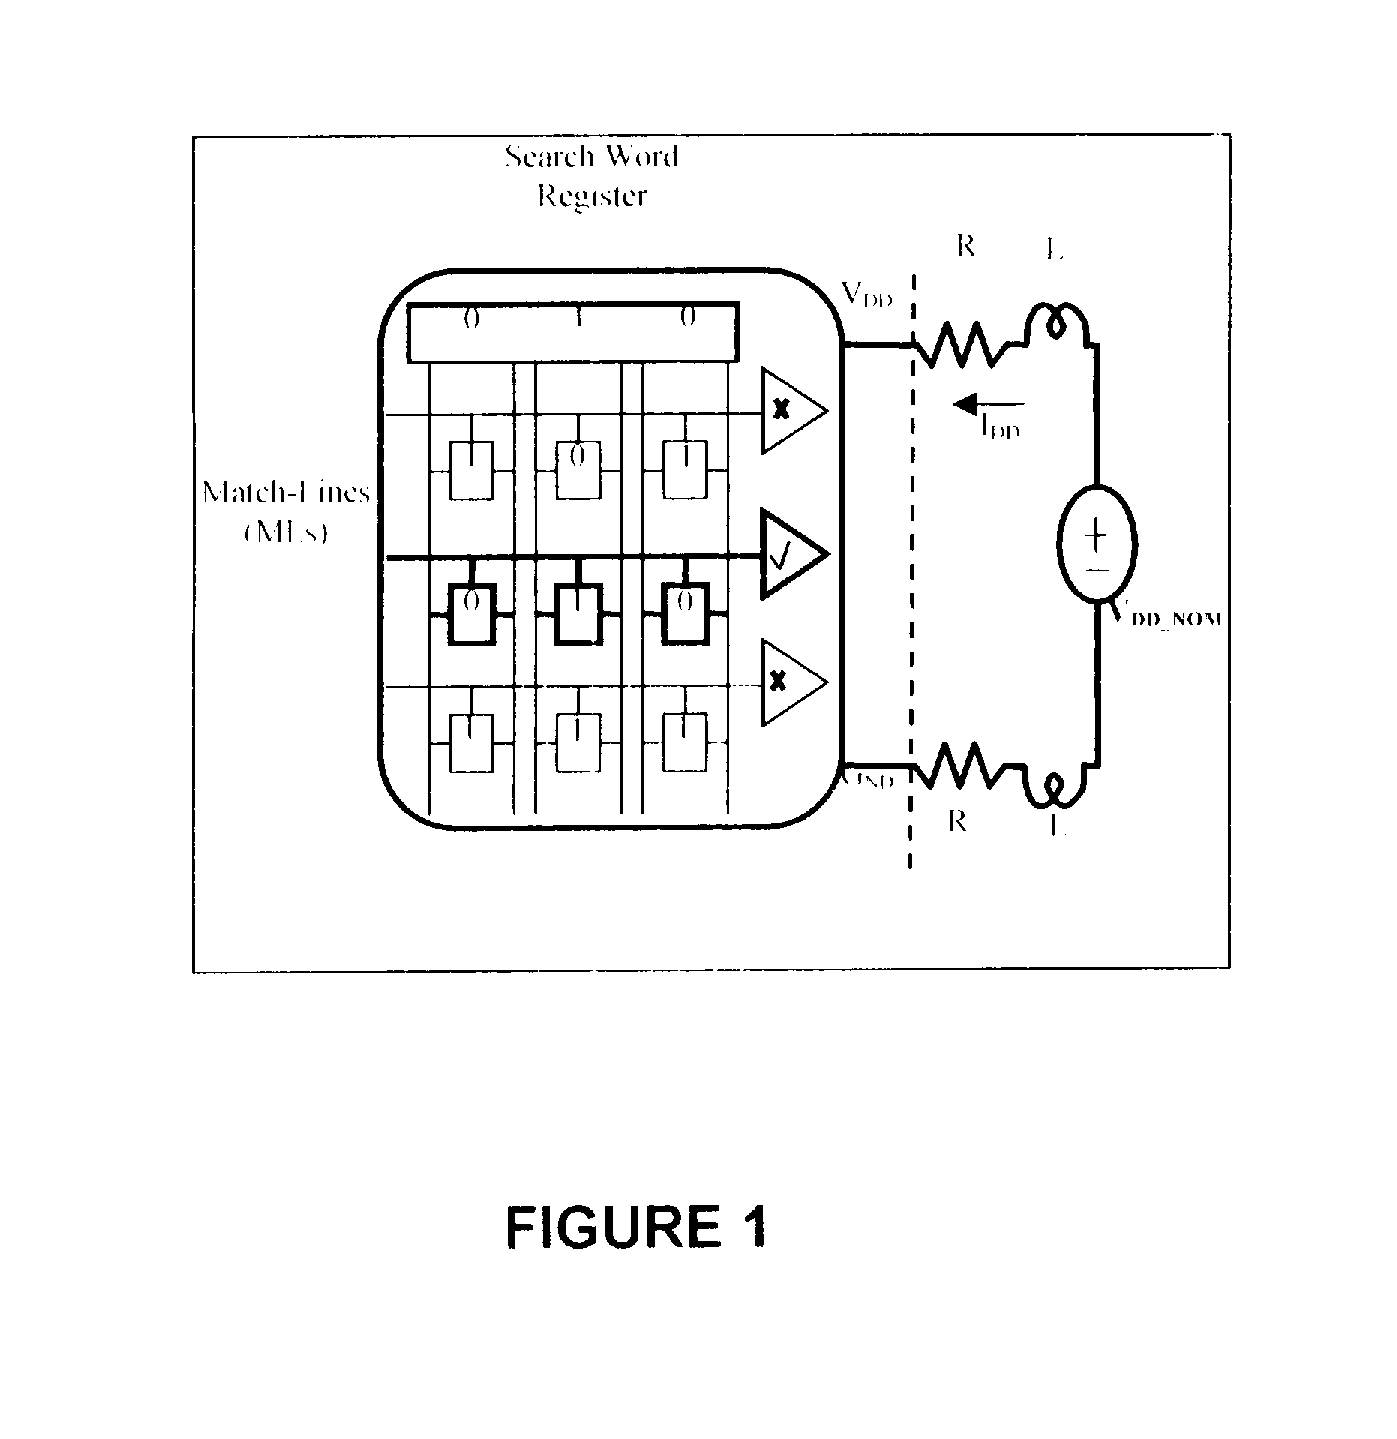 Apparatus and method for testing memory devices and circuits in integrated circuits